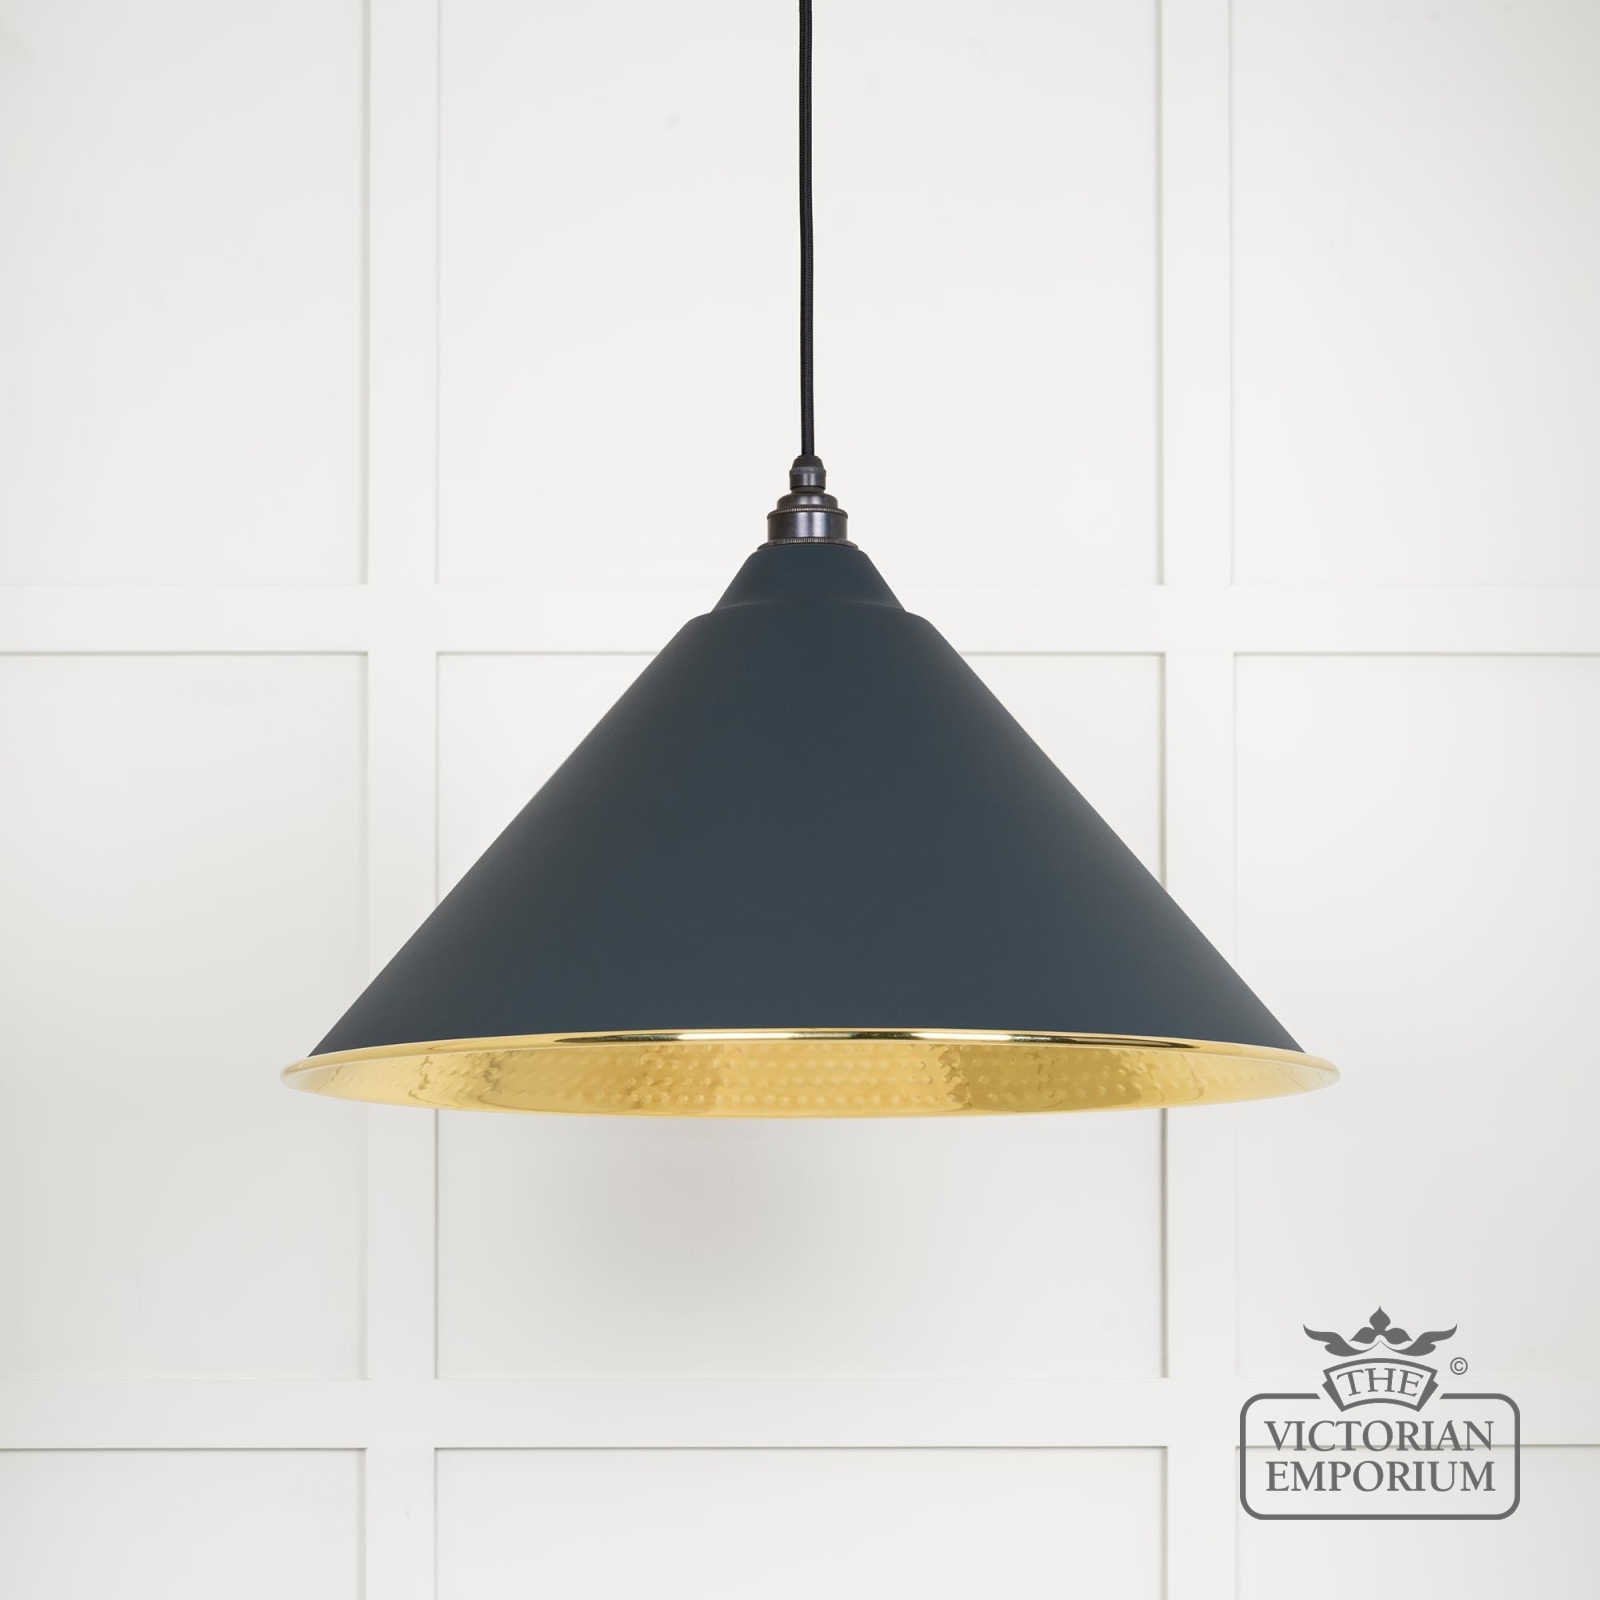 Hockliffe pendant light in Soot and Hammered Brass